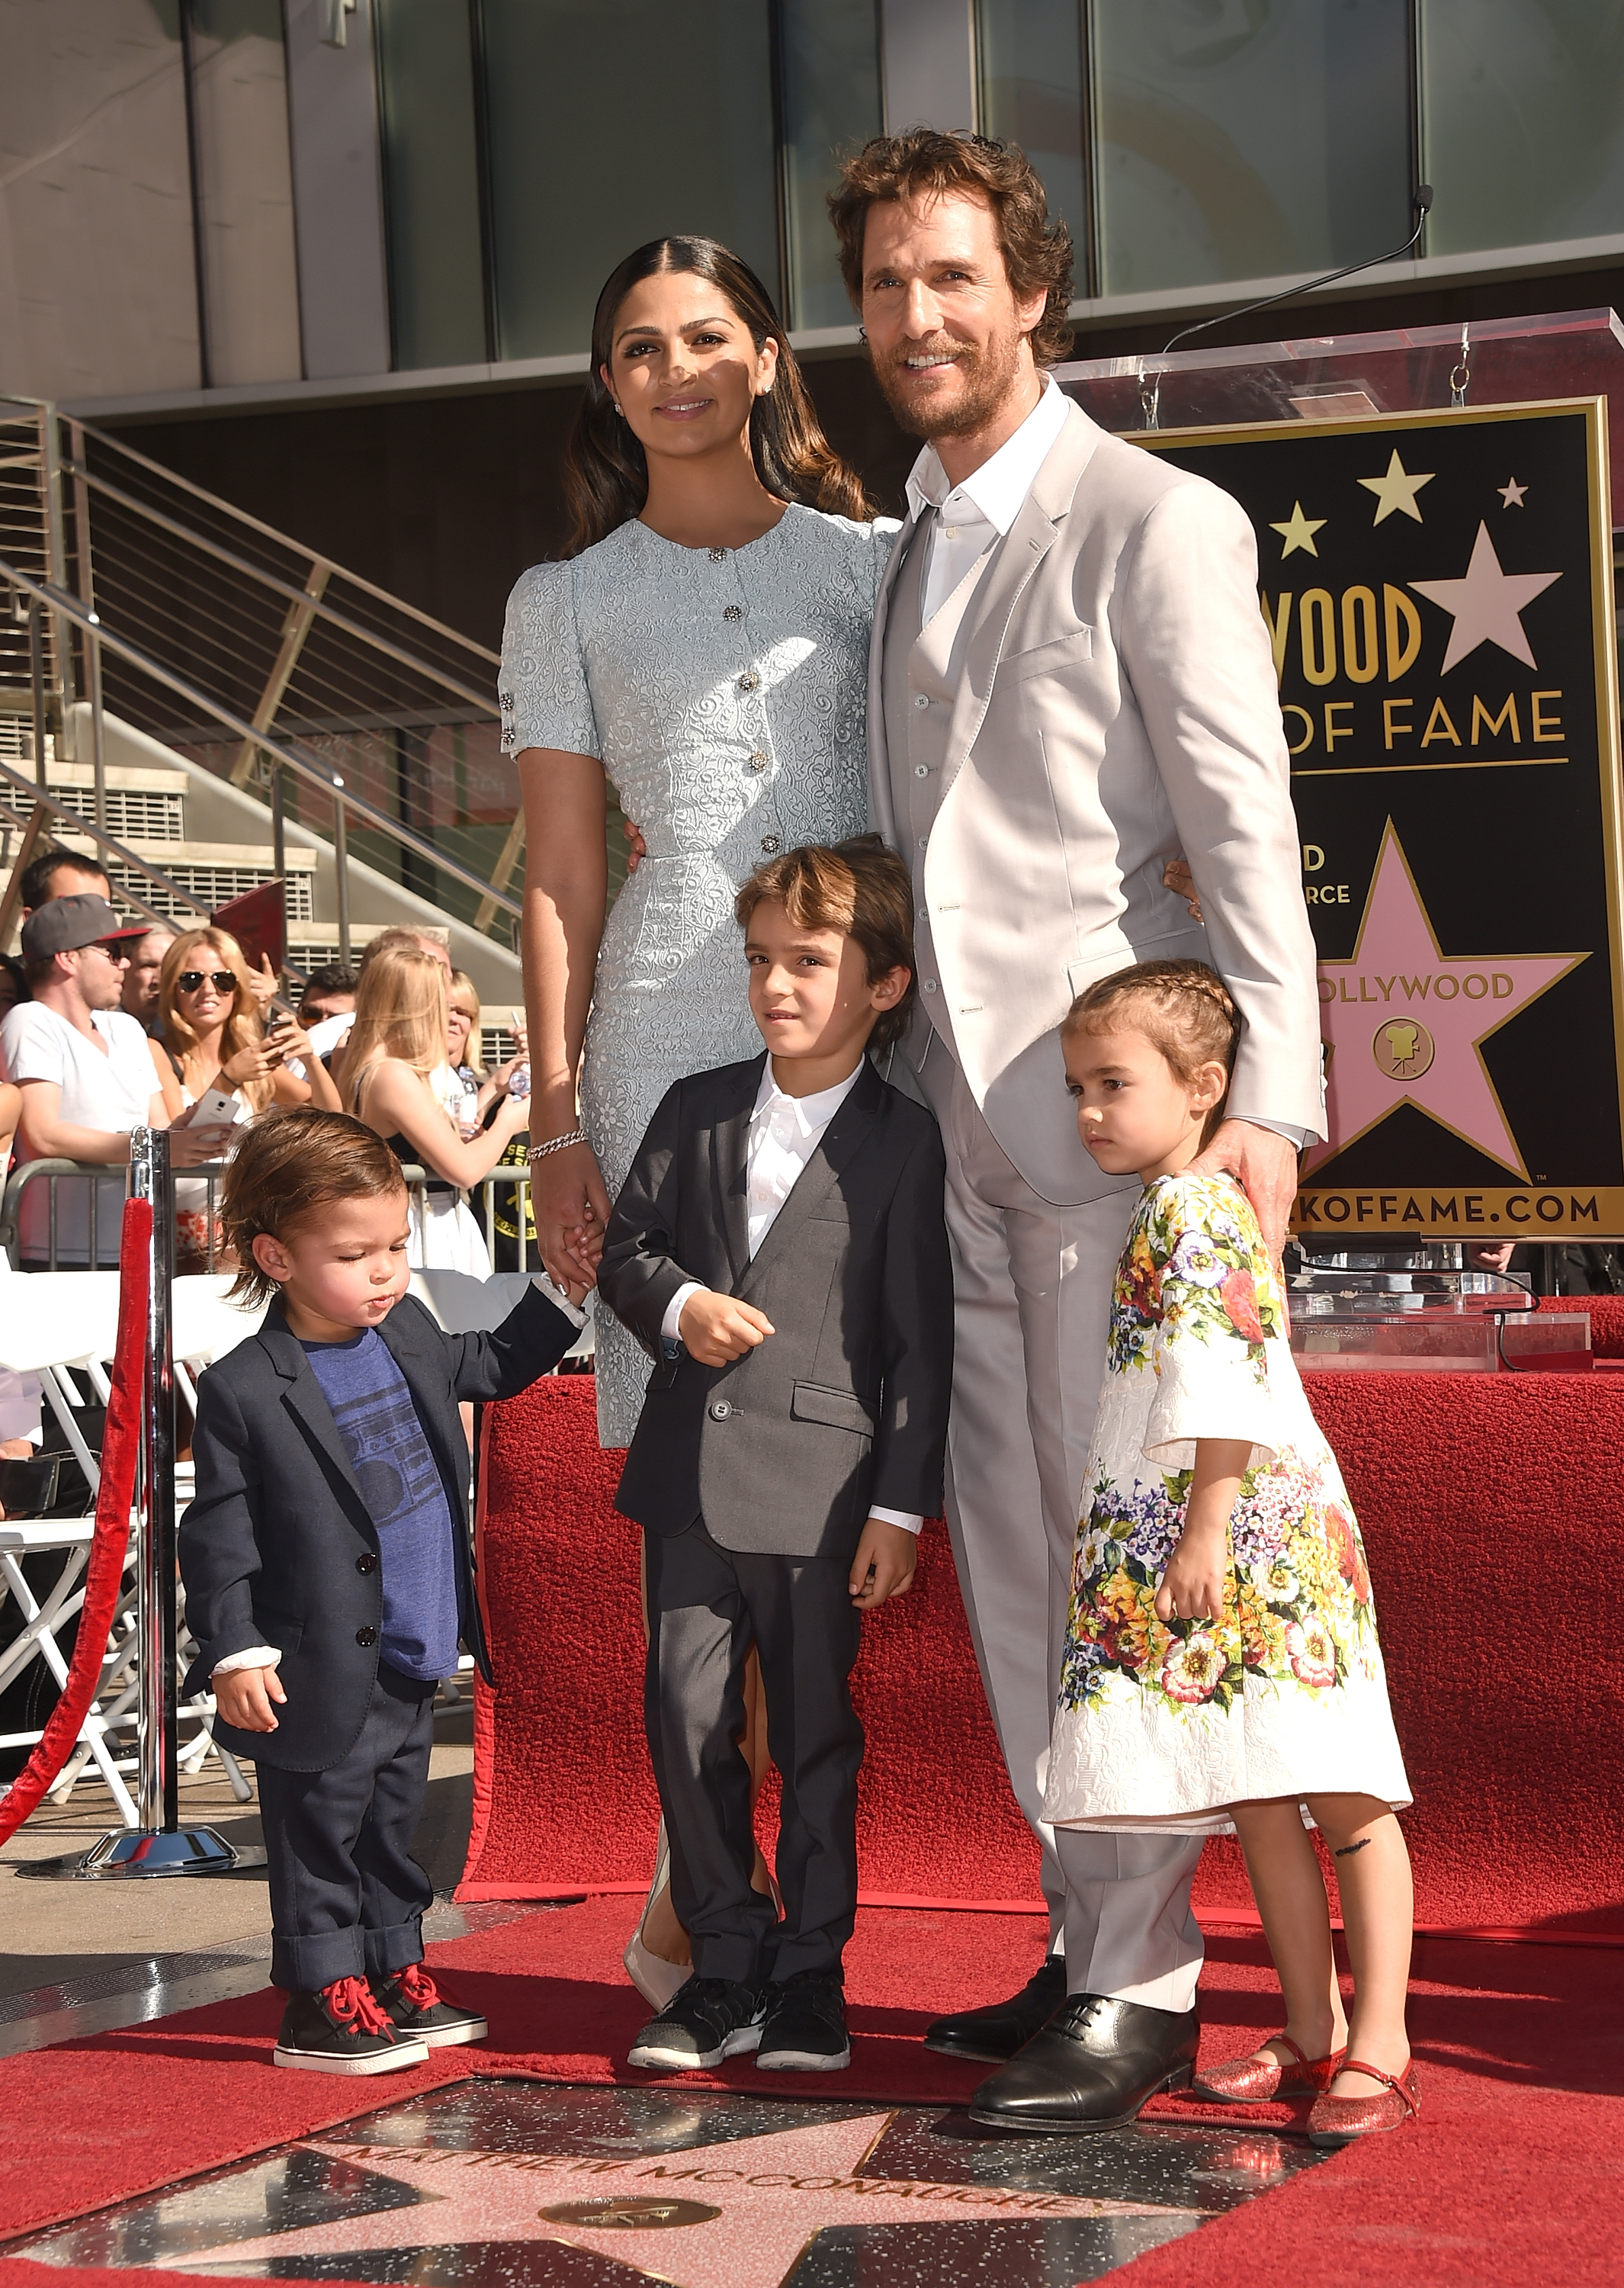 Matthew McConaughey and his wife Camila Alves and their children Levi, Livingston, and Vida McConaughey at The Hollywood Walk of Fame ceremony for the actor on November 17, 2014, in Hollywood, California | Source: Getty Images